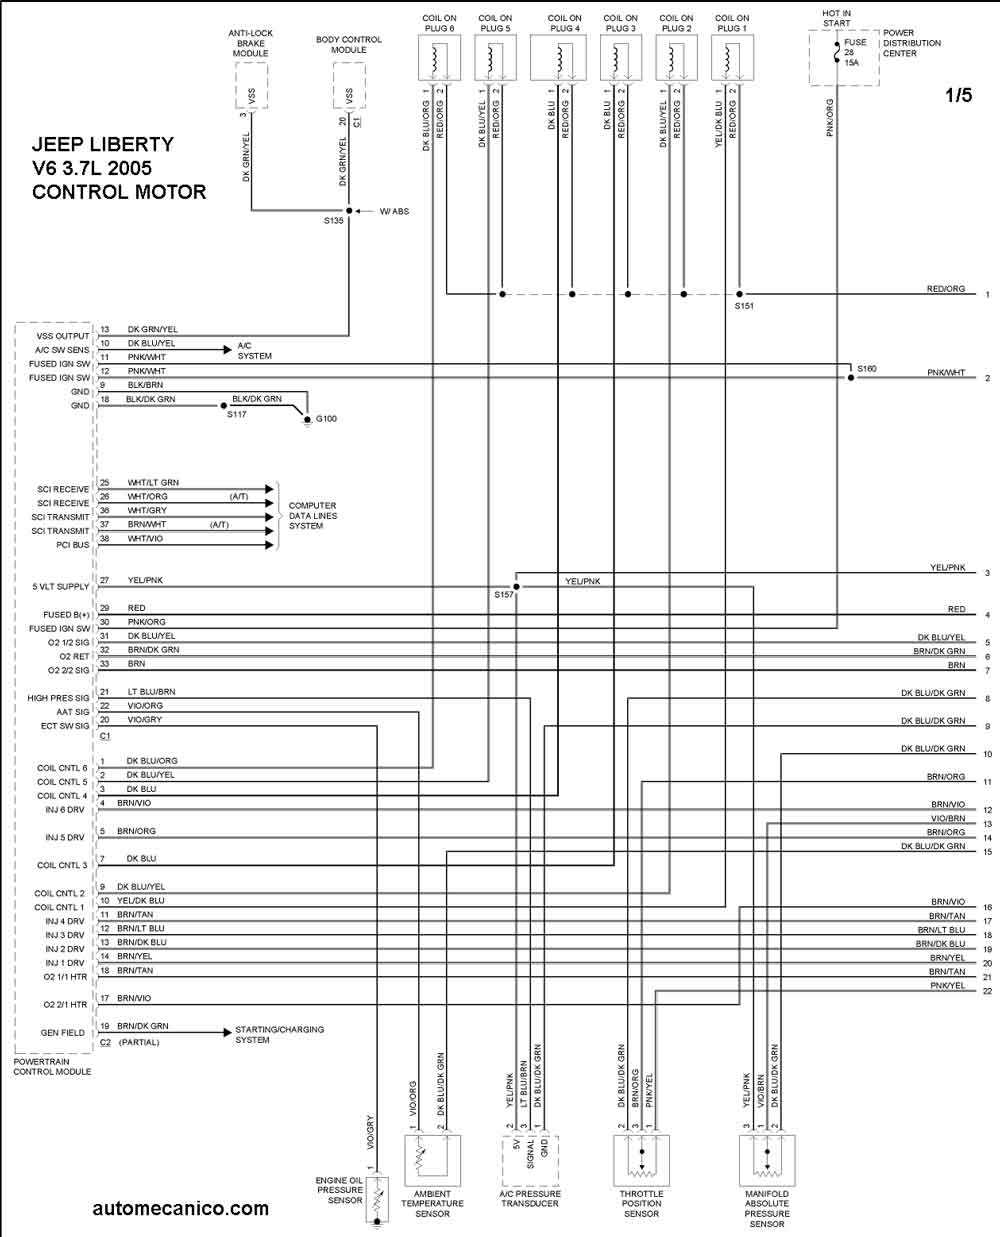 What is a Fuse Box Diagram?